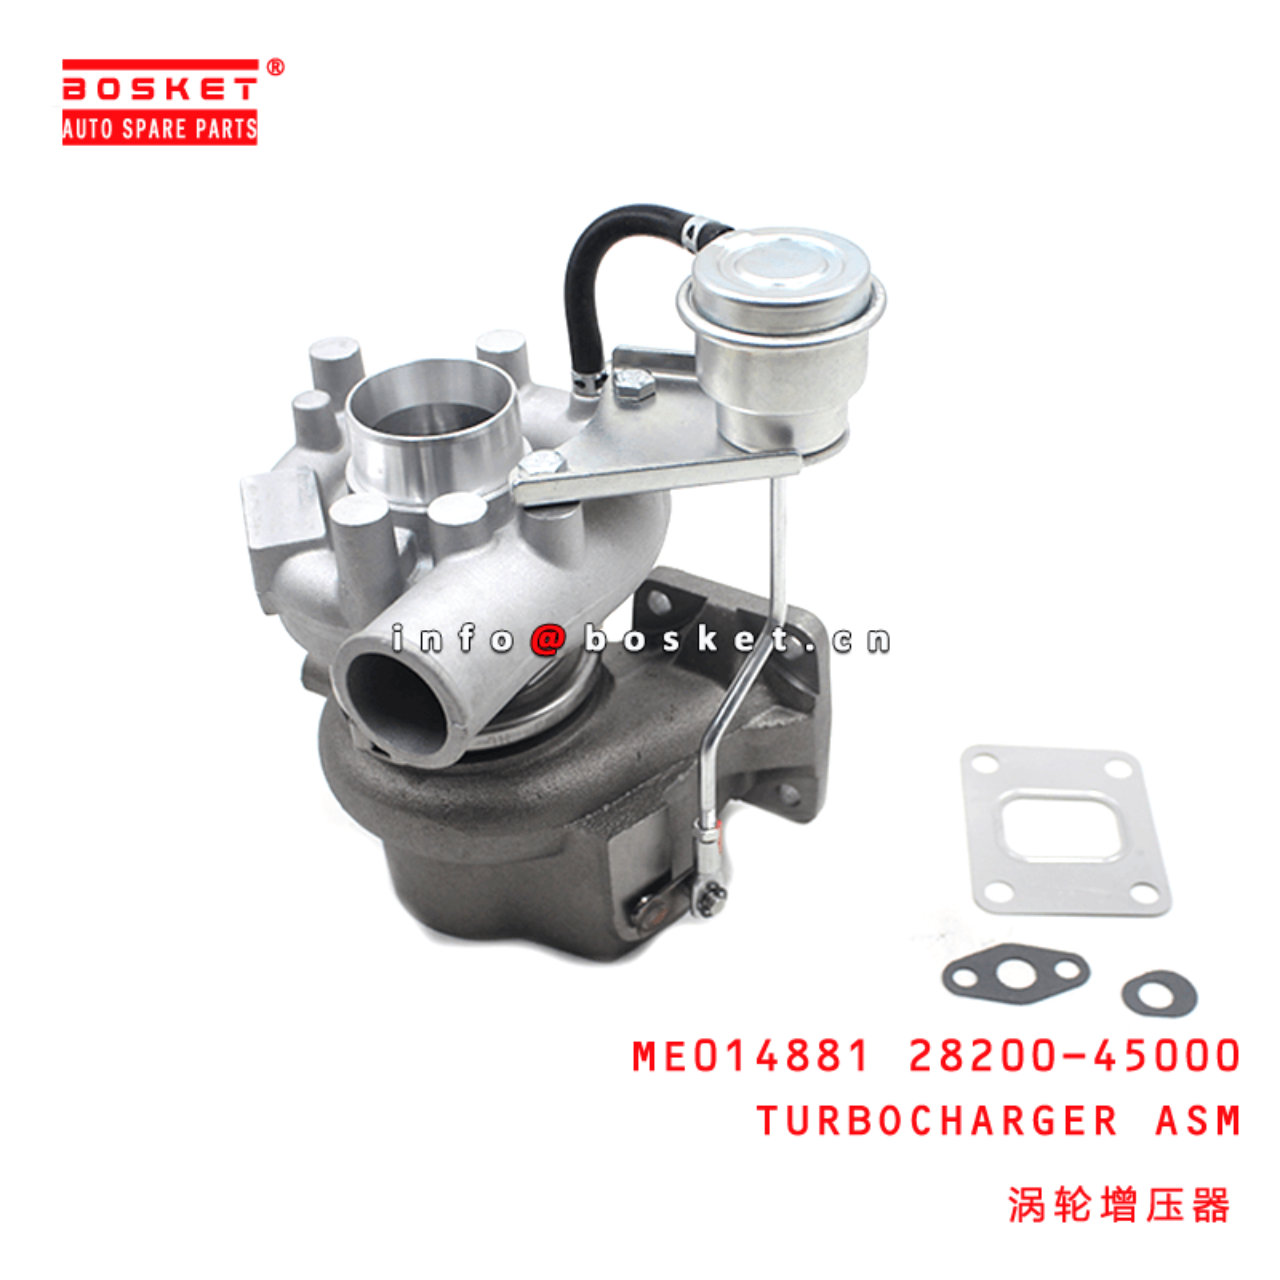 ME014881 28200-45000 Turbocharger Assembly Suitable For MITSUBISHI FUSO 